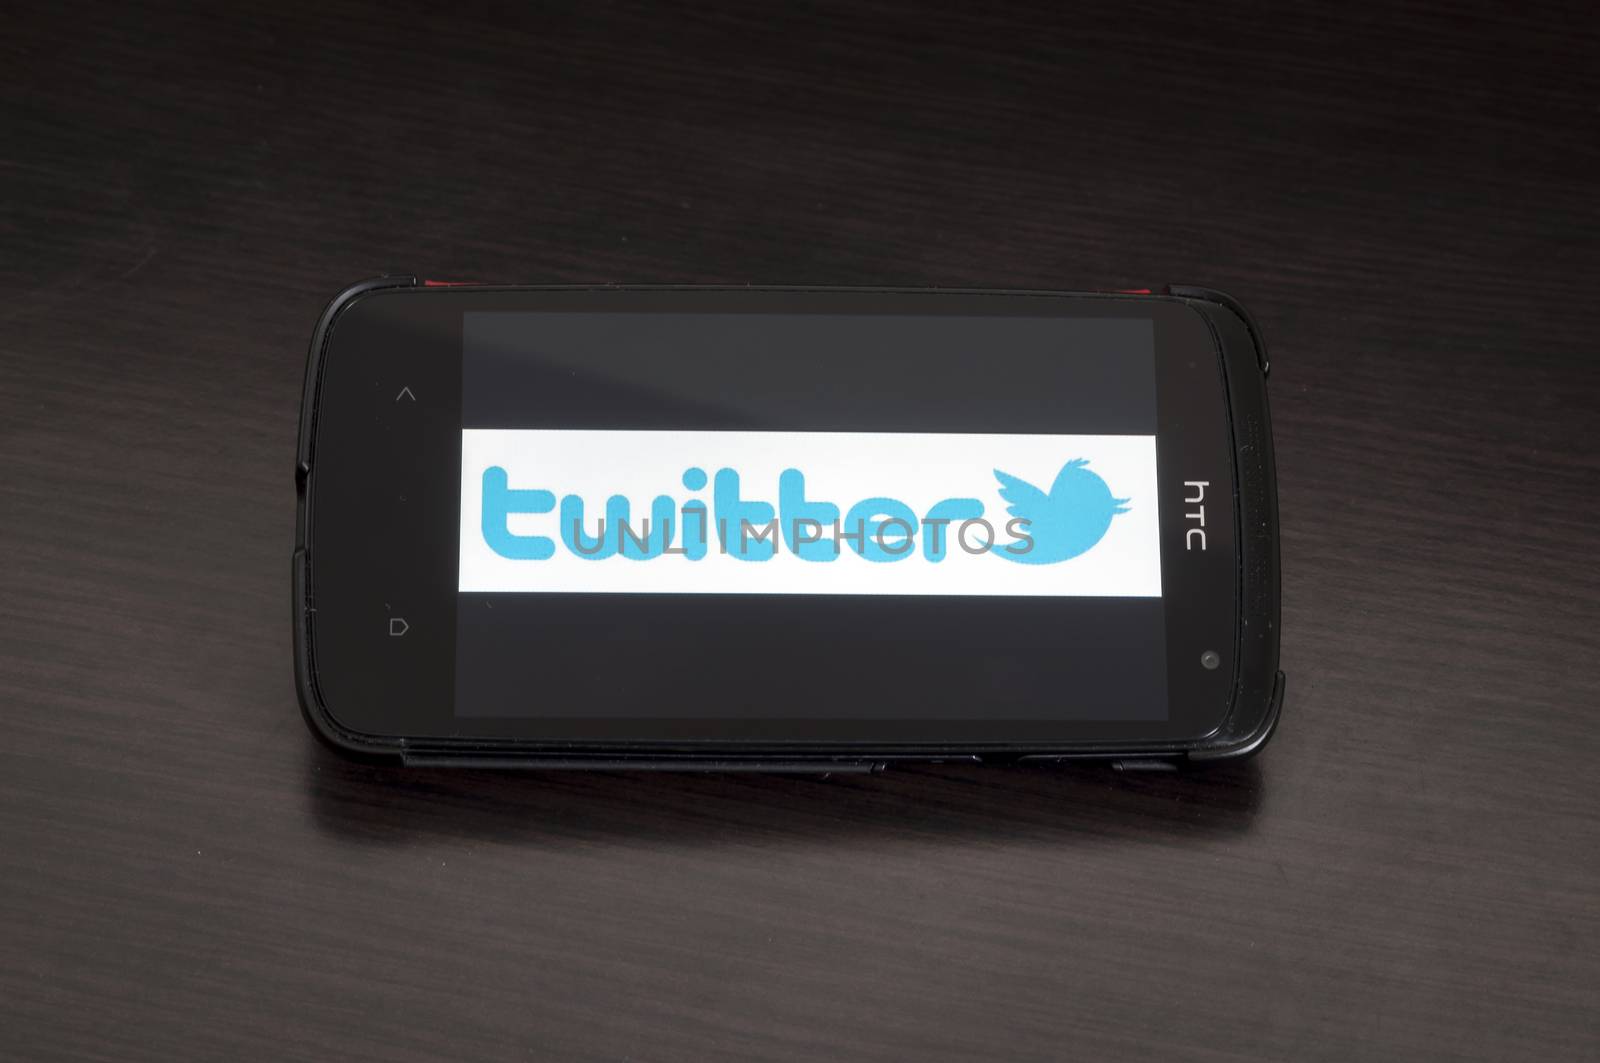 Photo of a HTC Desire device, showing the Twitter.com logo by maxmitzu